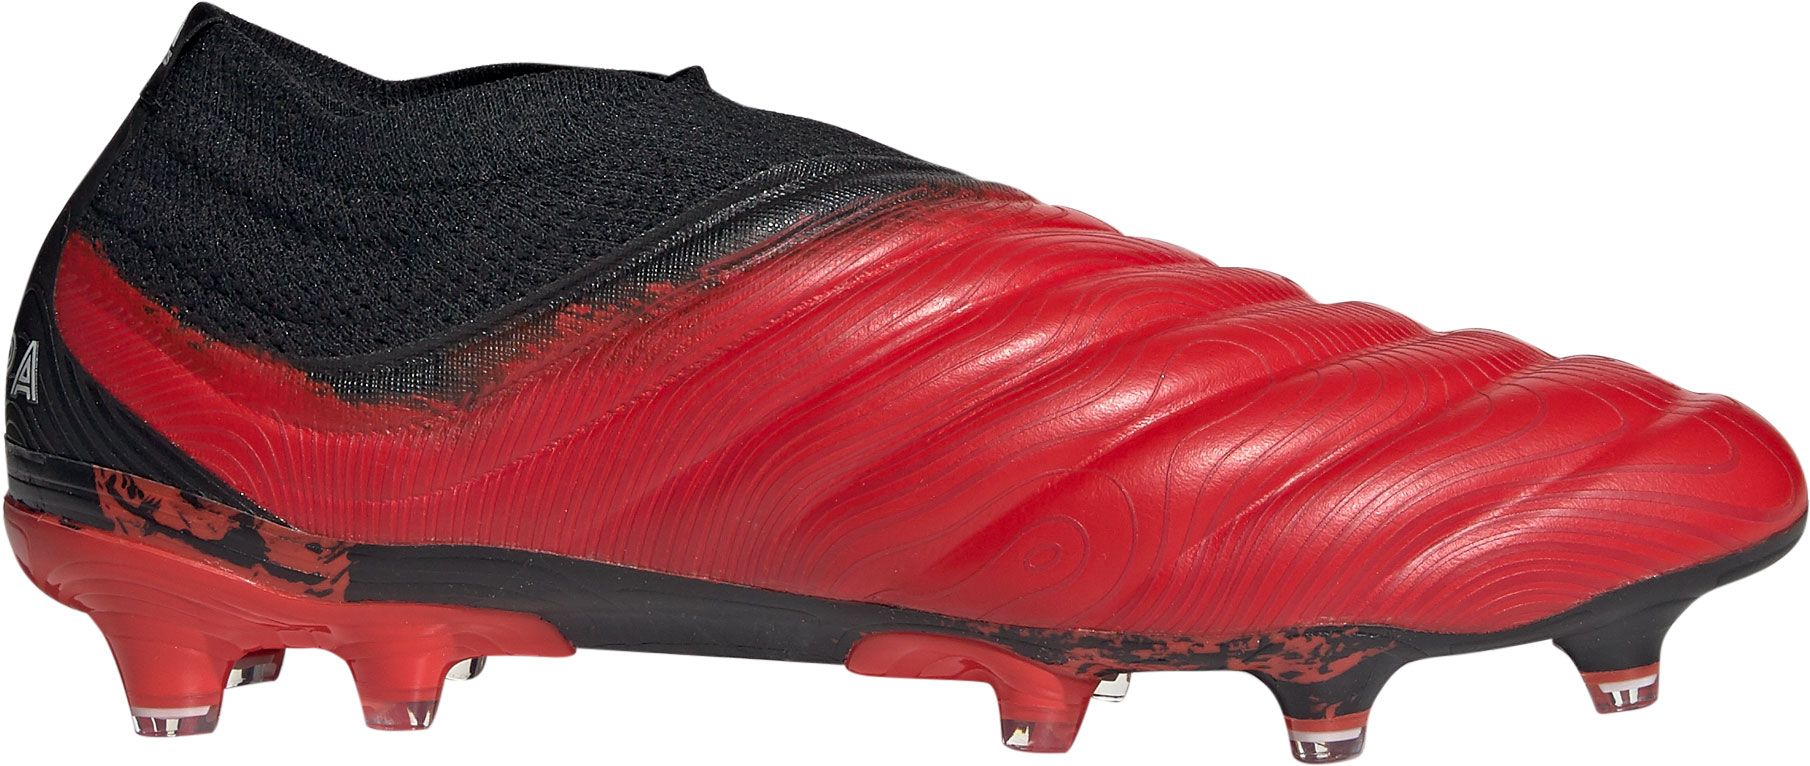 adidas copa soccer cleats